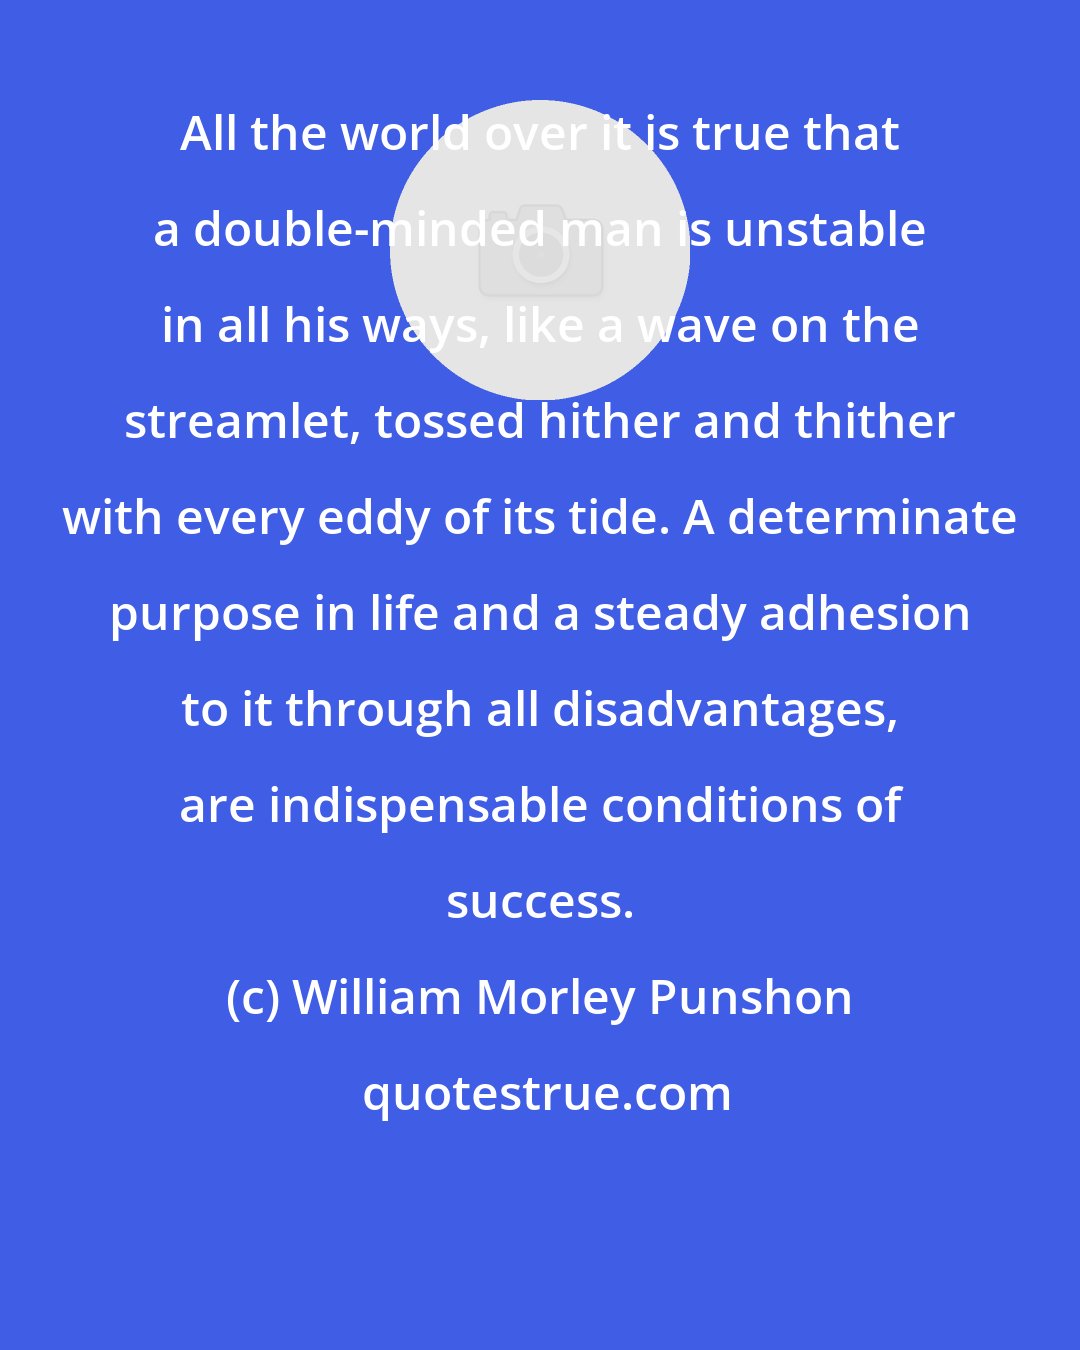 William Morley Punshon: All the world over it is true that a double-minded man is unstable in all his ways, like a wave on the streamlet, tossed hither and thither with every eddy of its tide. A determinate purpose in life and a steady adhesion to it through all disadvantages, are indispensable conditions of success.